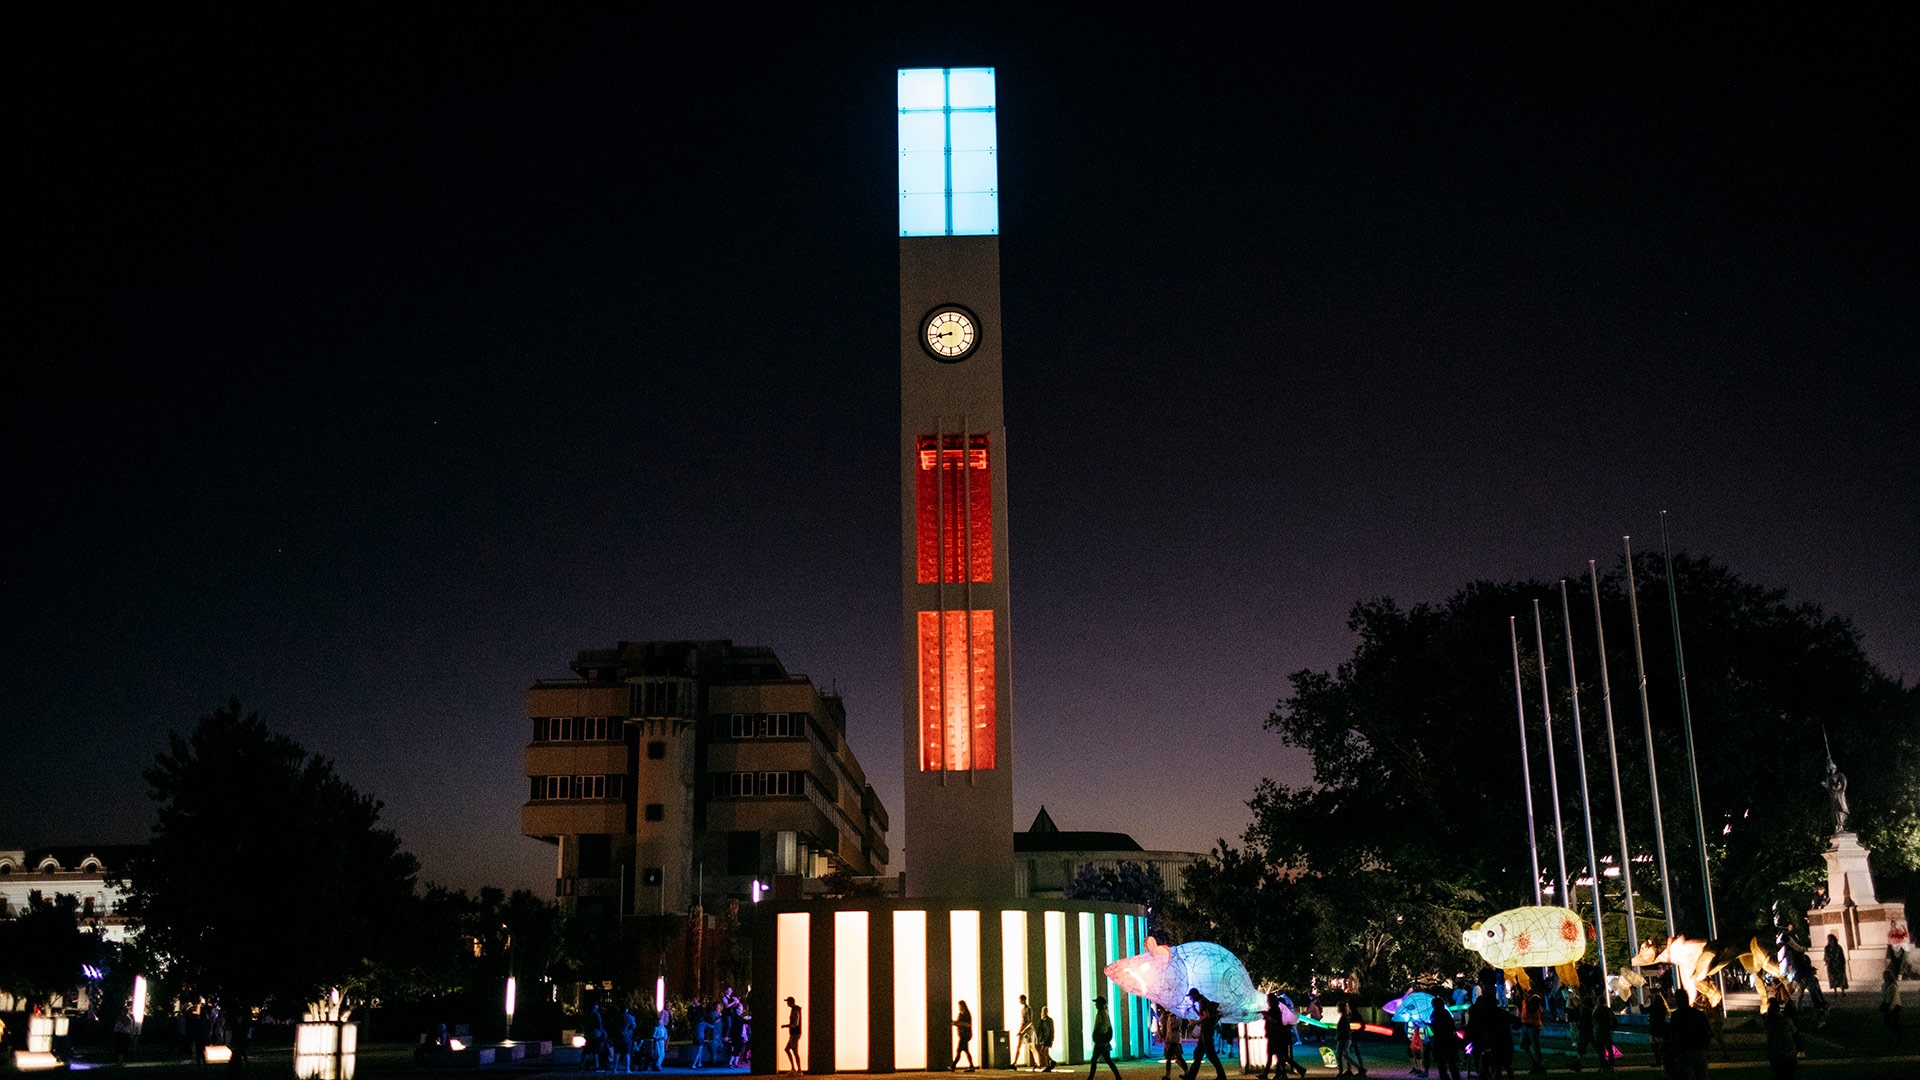 Image shows the clock tower lighting red and blue in early evening